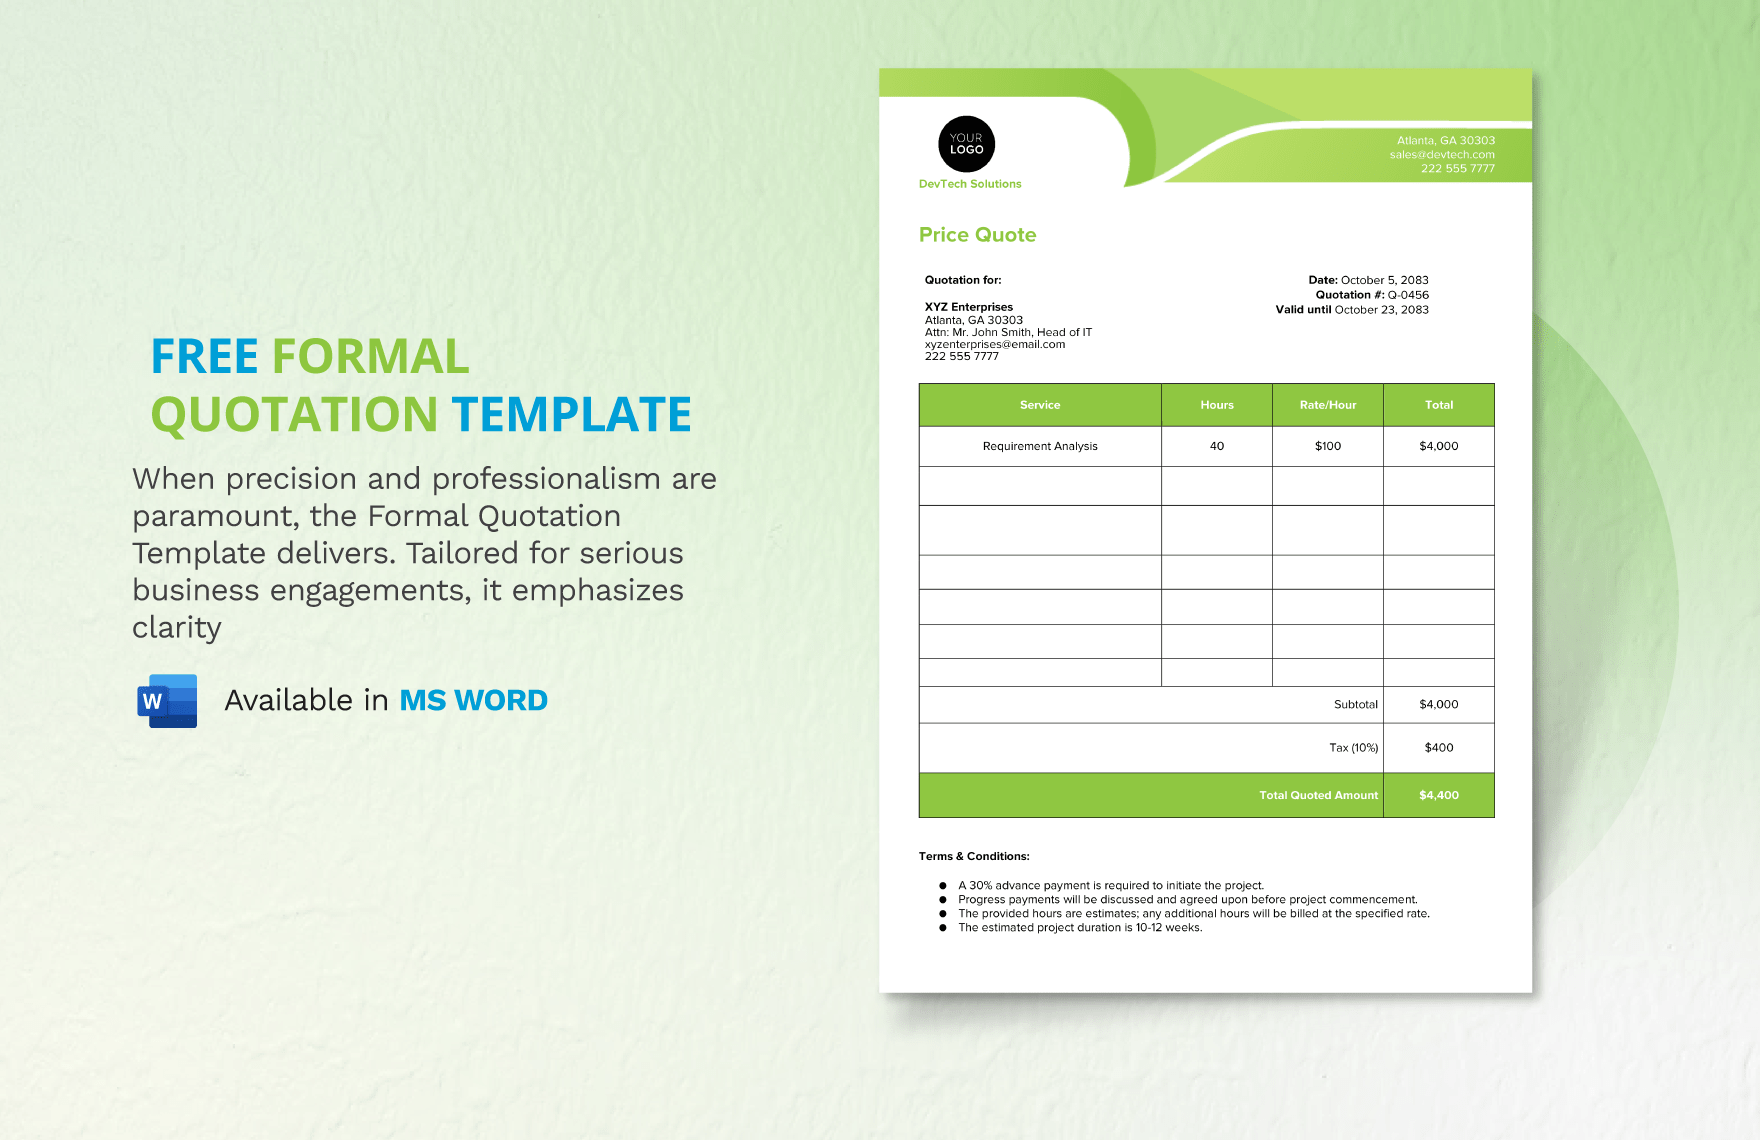 Free Formal Quotation Template in Word